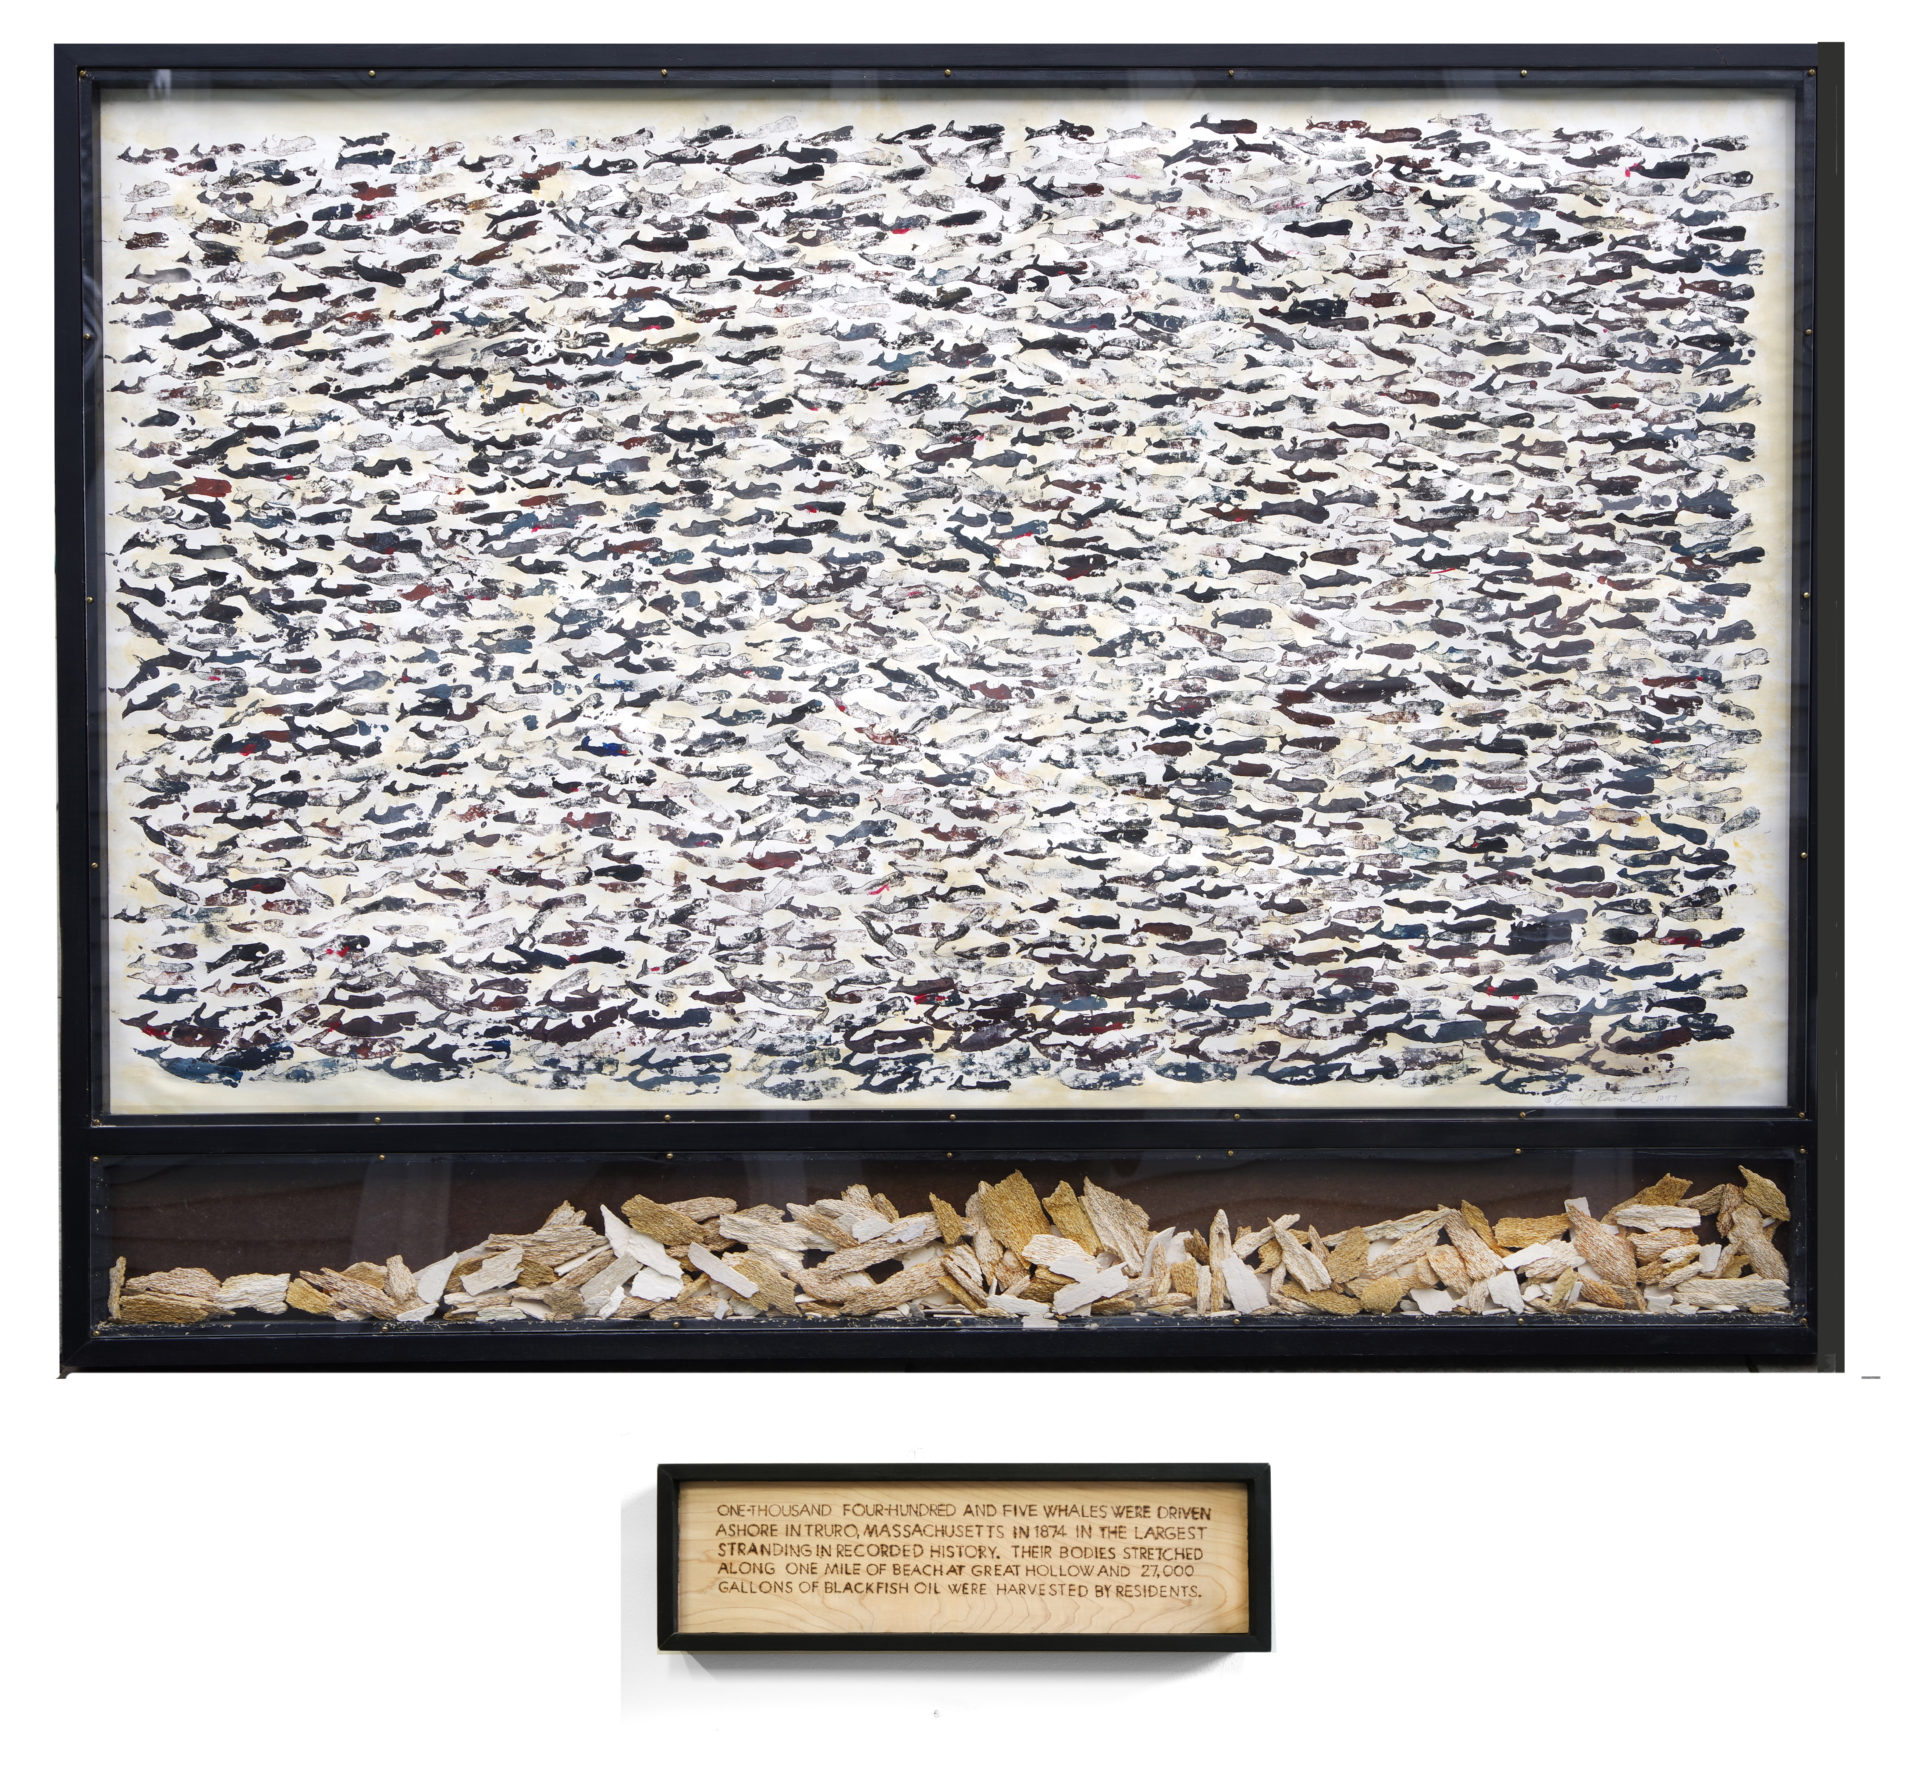 Unique block print on rag paper with bone fragments in artist’s frame & wood-burned text panel